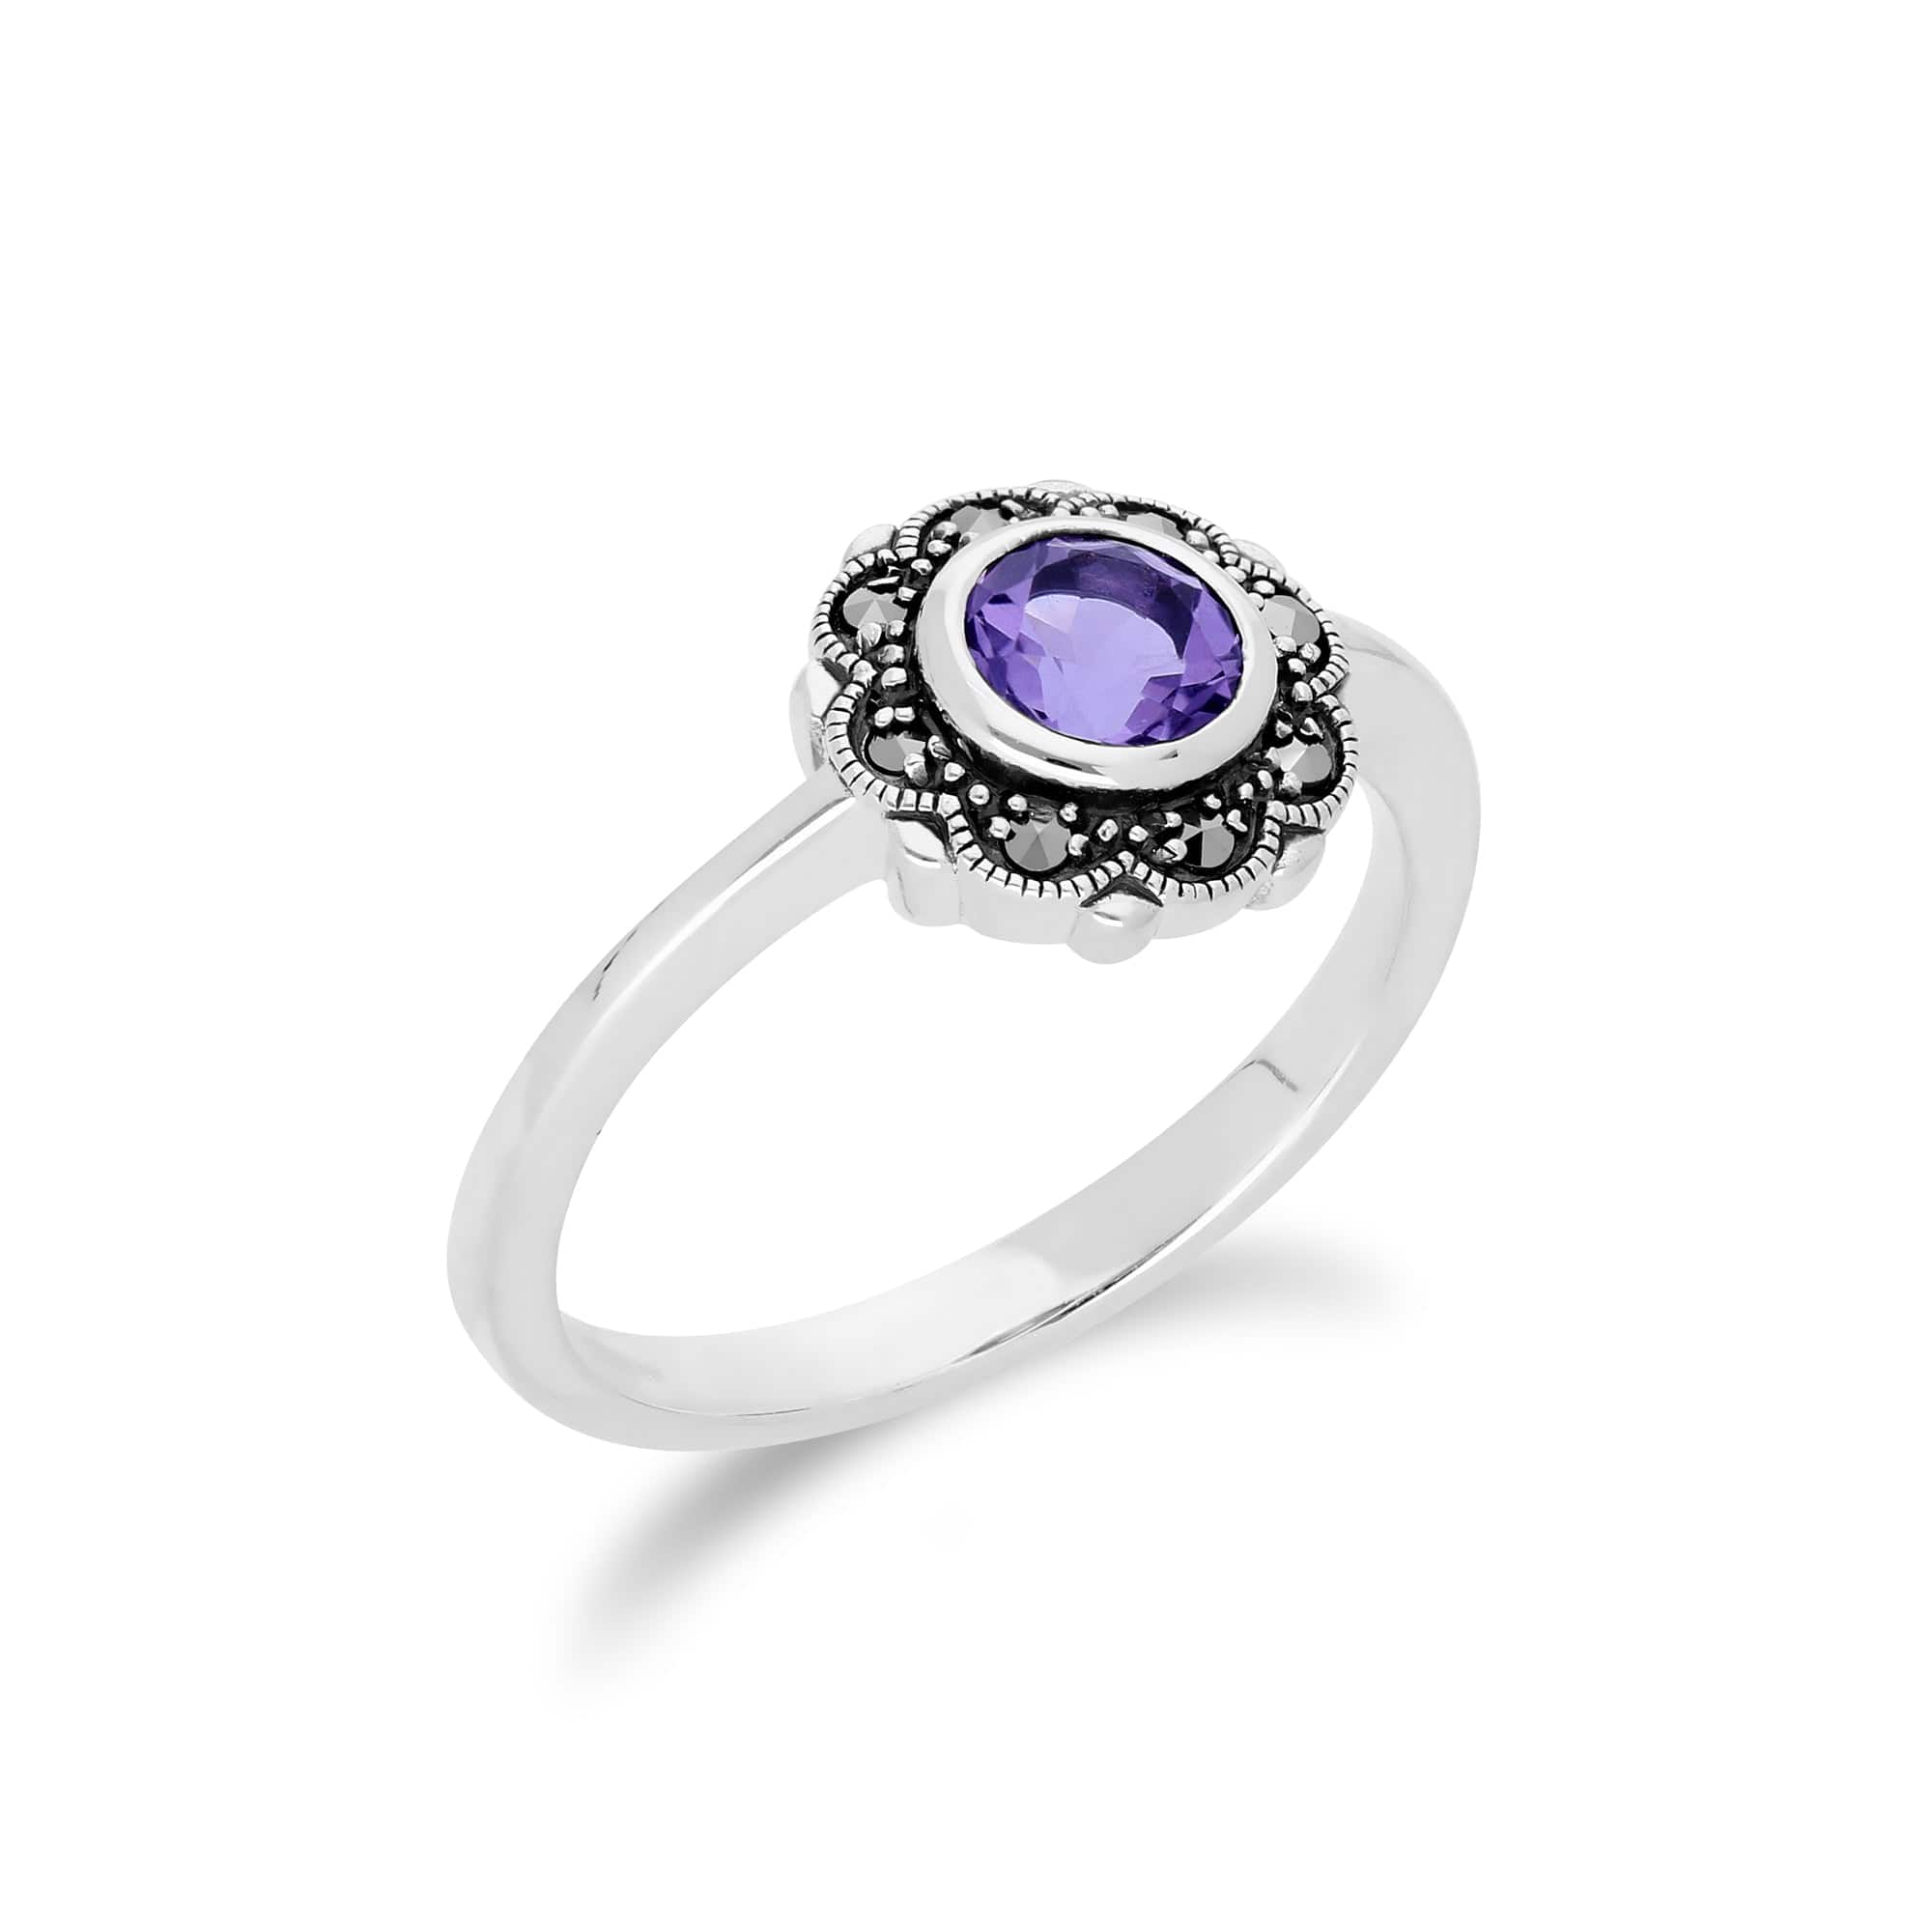 Floral Round Amethyst & Marcasite Halo Ring in 925 Sterling Silver